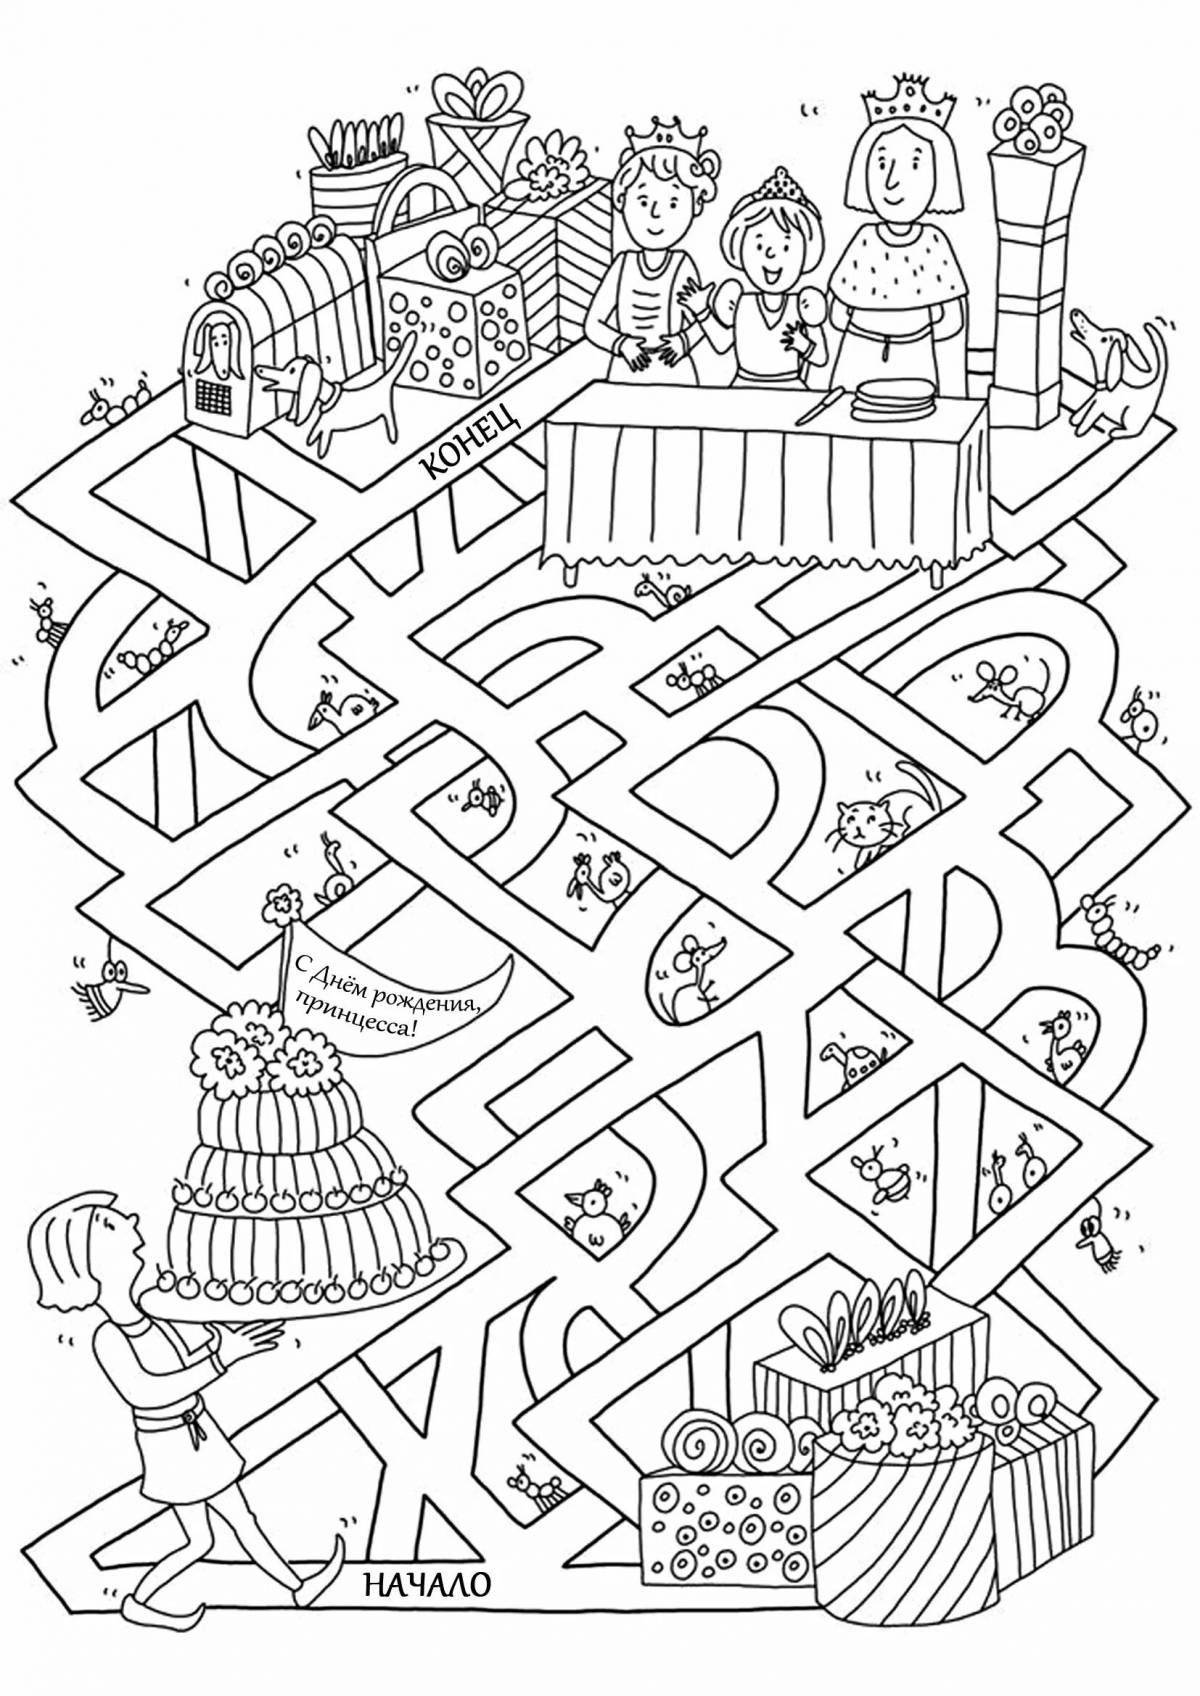 Terrifying coloring puzzles